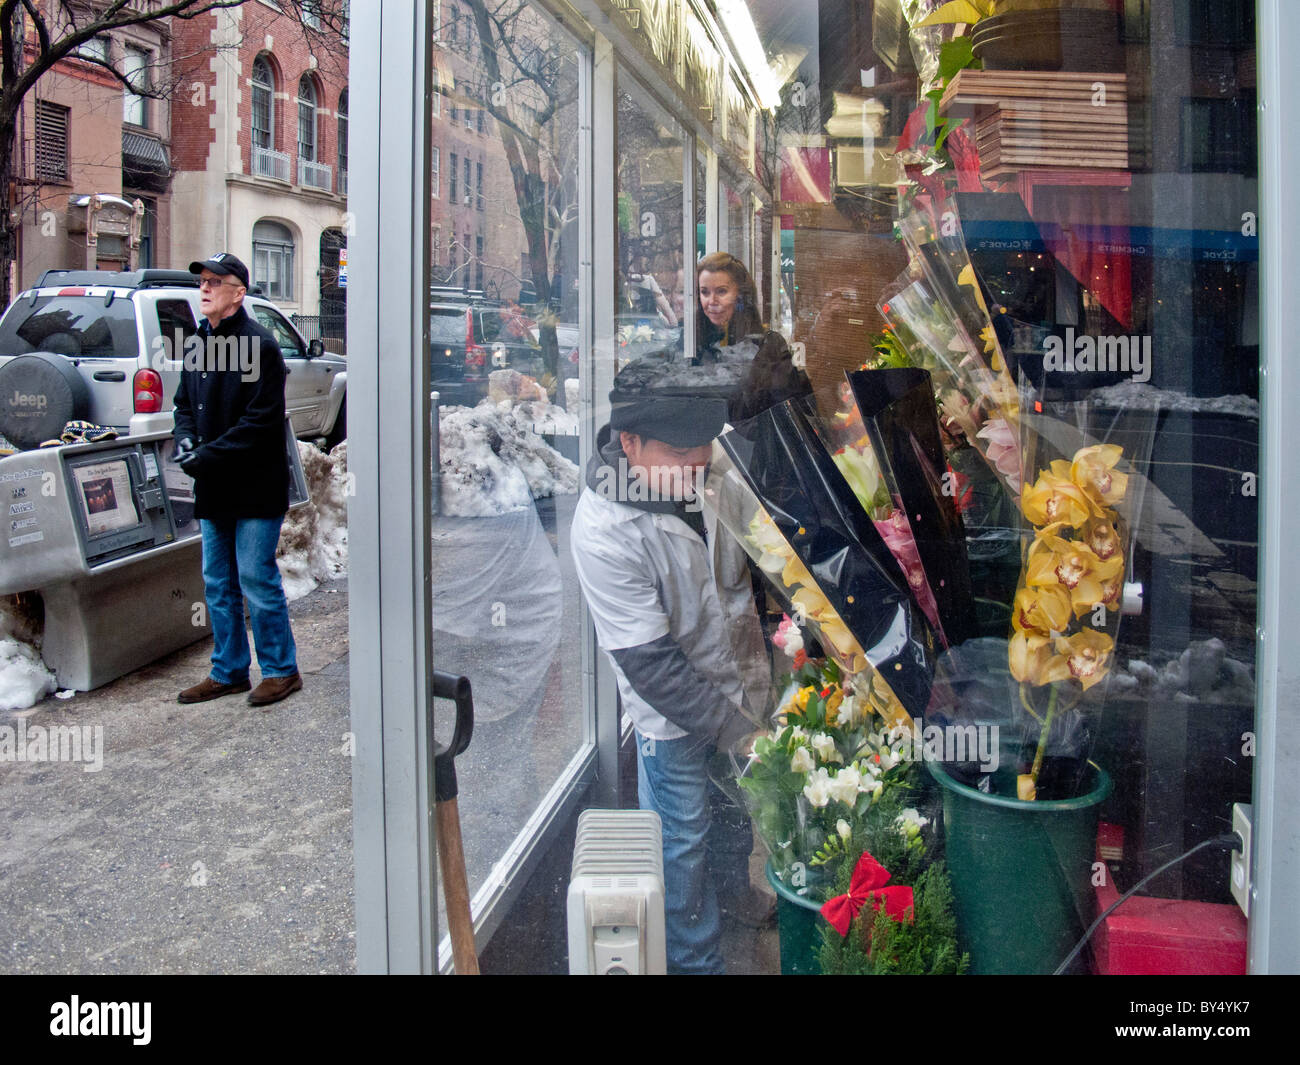 While her husband searchers for a taxi, a woman purchases fresh flowers at a warmed sidewalk kiosk on a winter day in NYC. Stock Photo